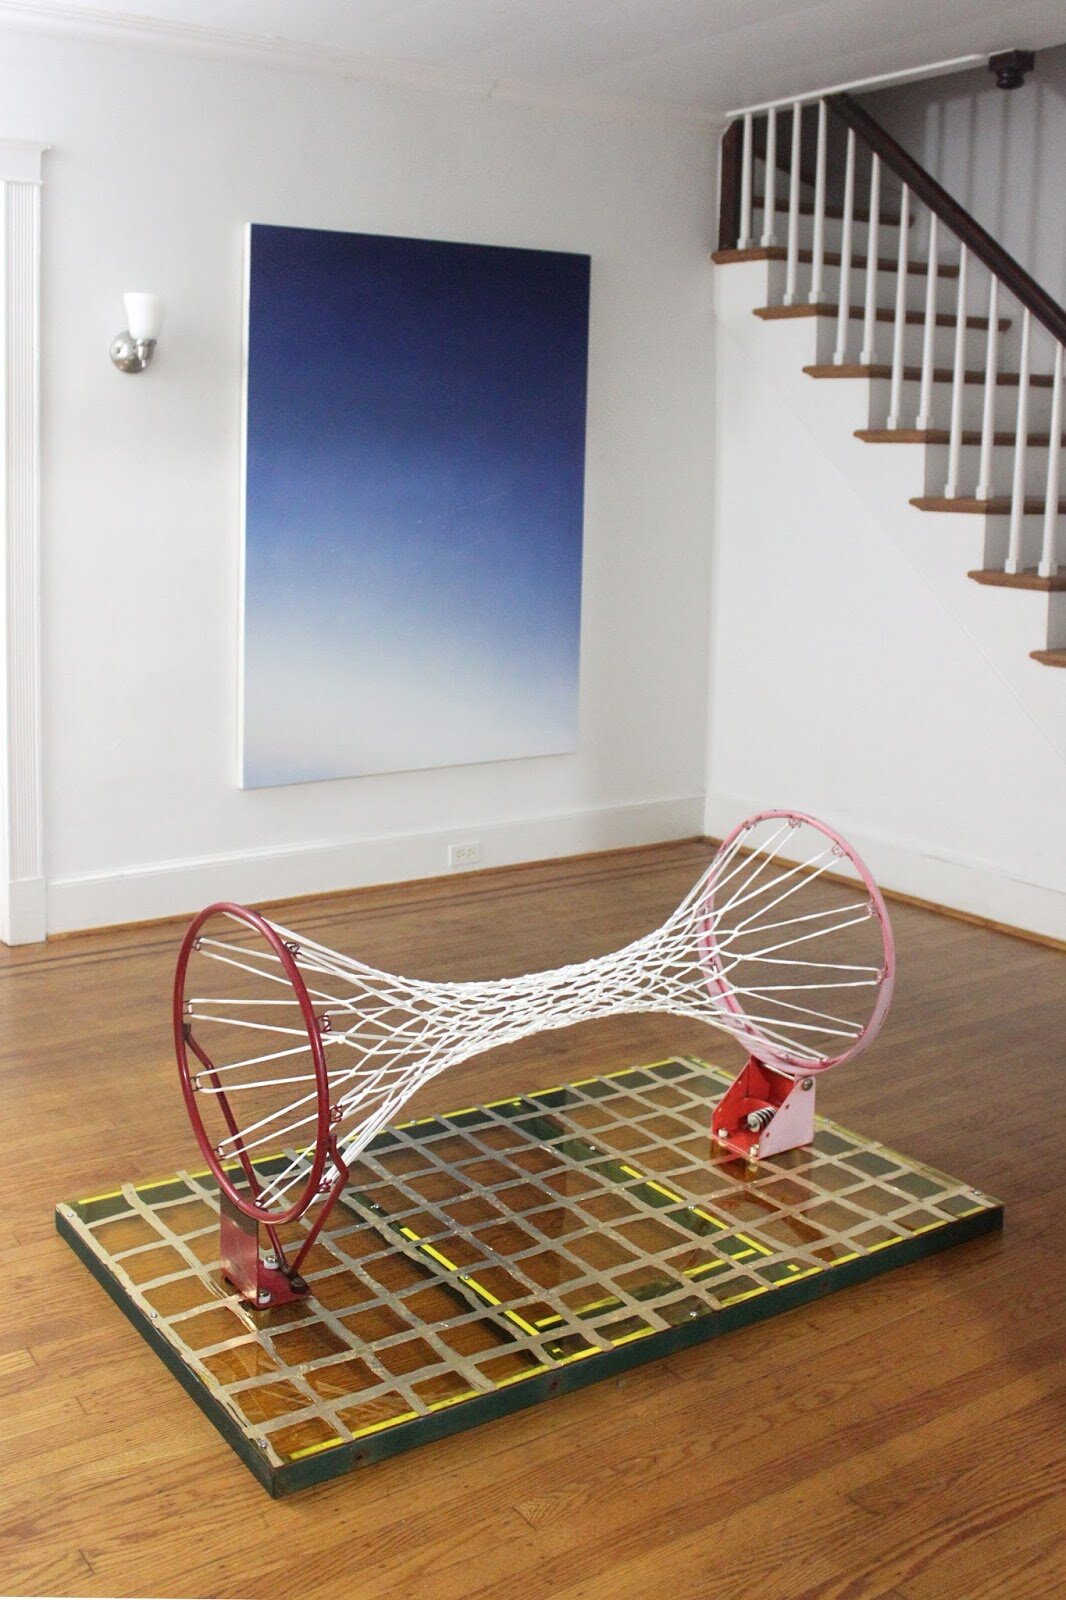  [foreground]  Untitled (Warp) ( Goalrilla backboard frame, steel rims, Color Cast acrylic (yellow transparent #2208), gold leaf, 120 gram all-weather nylon basketball net, various hardware) 2015  [background]  Skywriting (QUIET)  (acrylic on canvas)